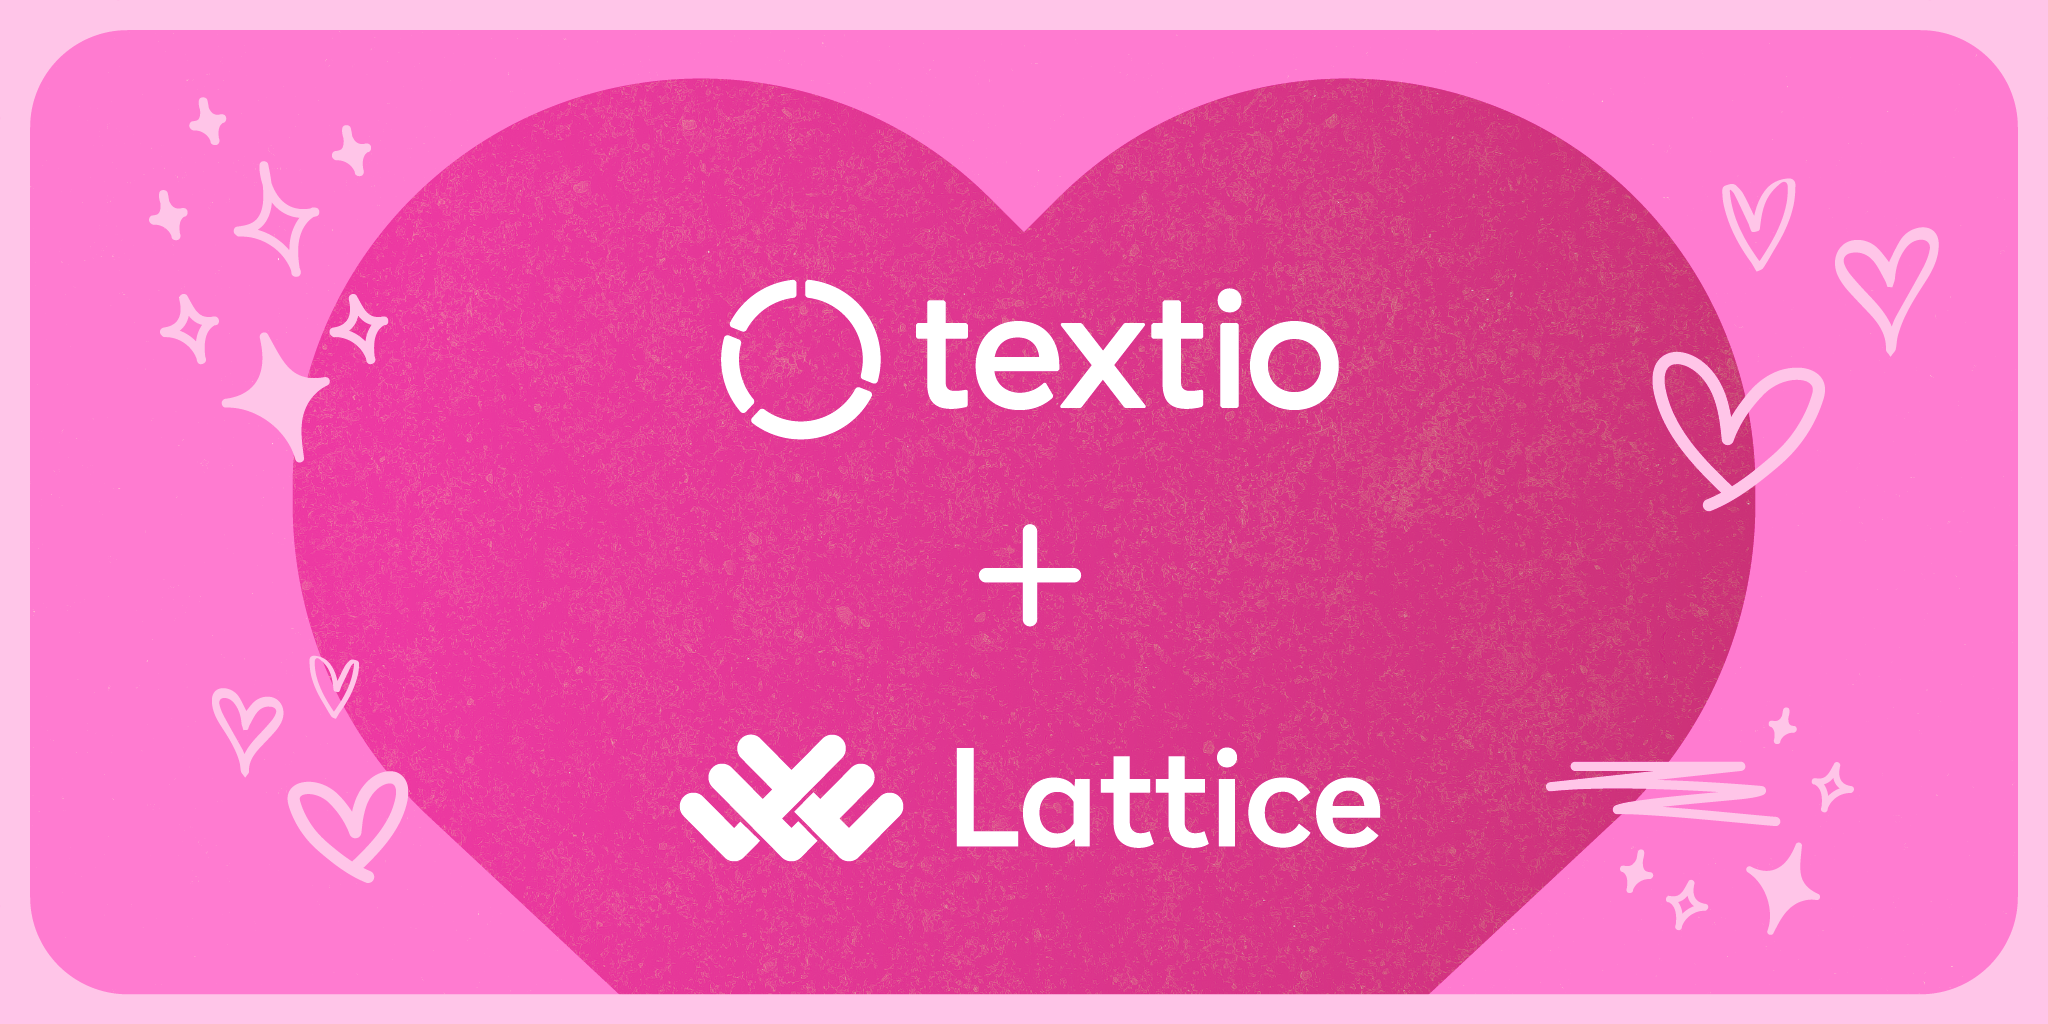 Textio Lift helps managers write better feedback in Lattice, where they're already working. 